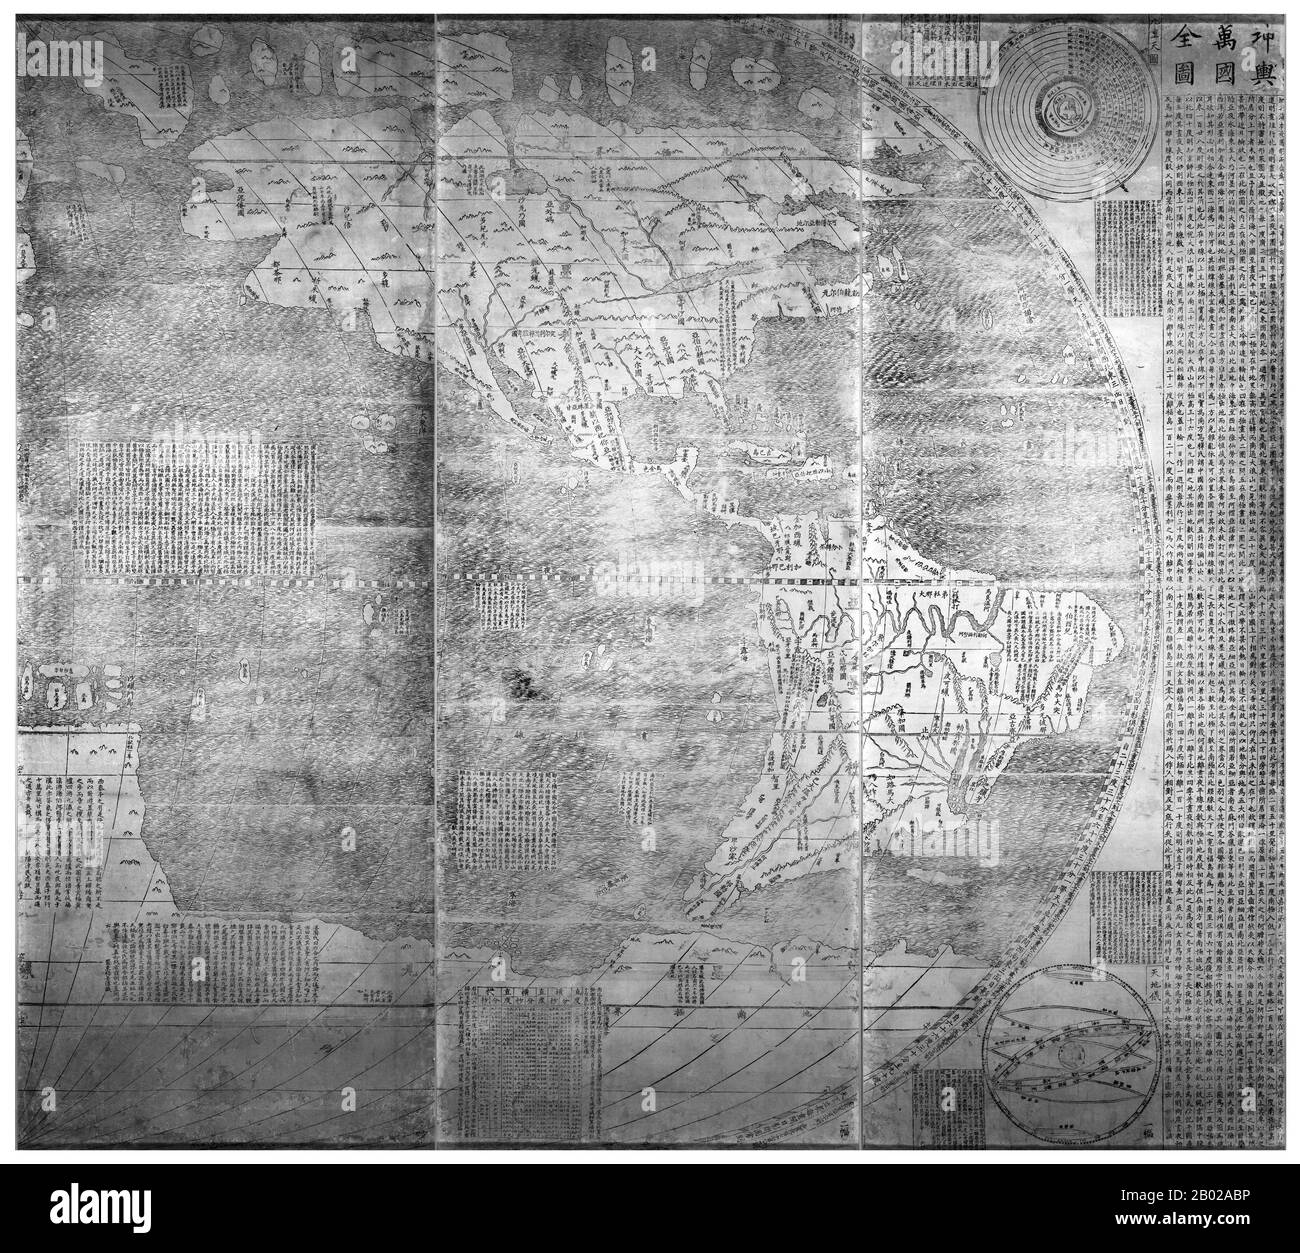 Kunyu Wanguo Quantu (坤輿萬國全圖) was printed by Matteo Ricci upon request of Wanli Emperor in Beijing, 1602. Ricci's Chinese collaborators were Zhong Wentao and Li Zhizao.  The map was crucial in expanding Chinese knowledge of the world. It was later exported to Japan and was influential there as well. Stock Photo